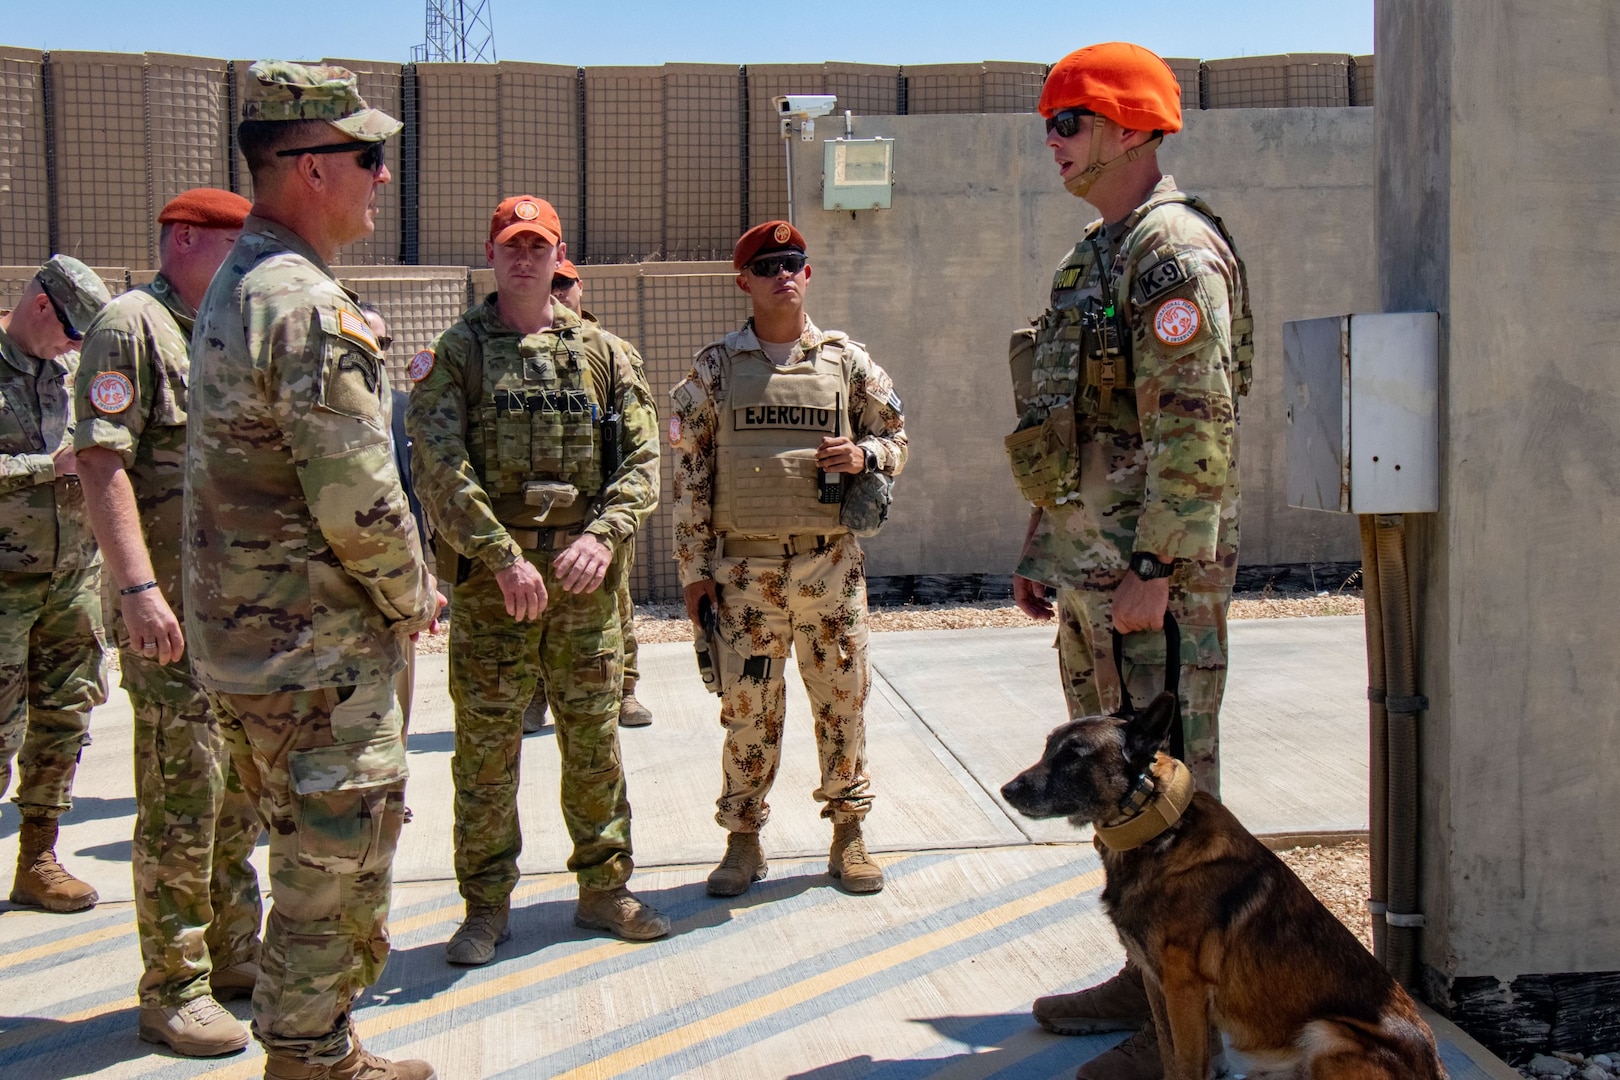 General Michael “Erik” Kurilla, commander of U.S. Central Command, visited troops from the Multinational Force and Observer (MFO) mission on the Sinai Peninsula, Sept. 10, 2022.